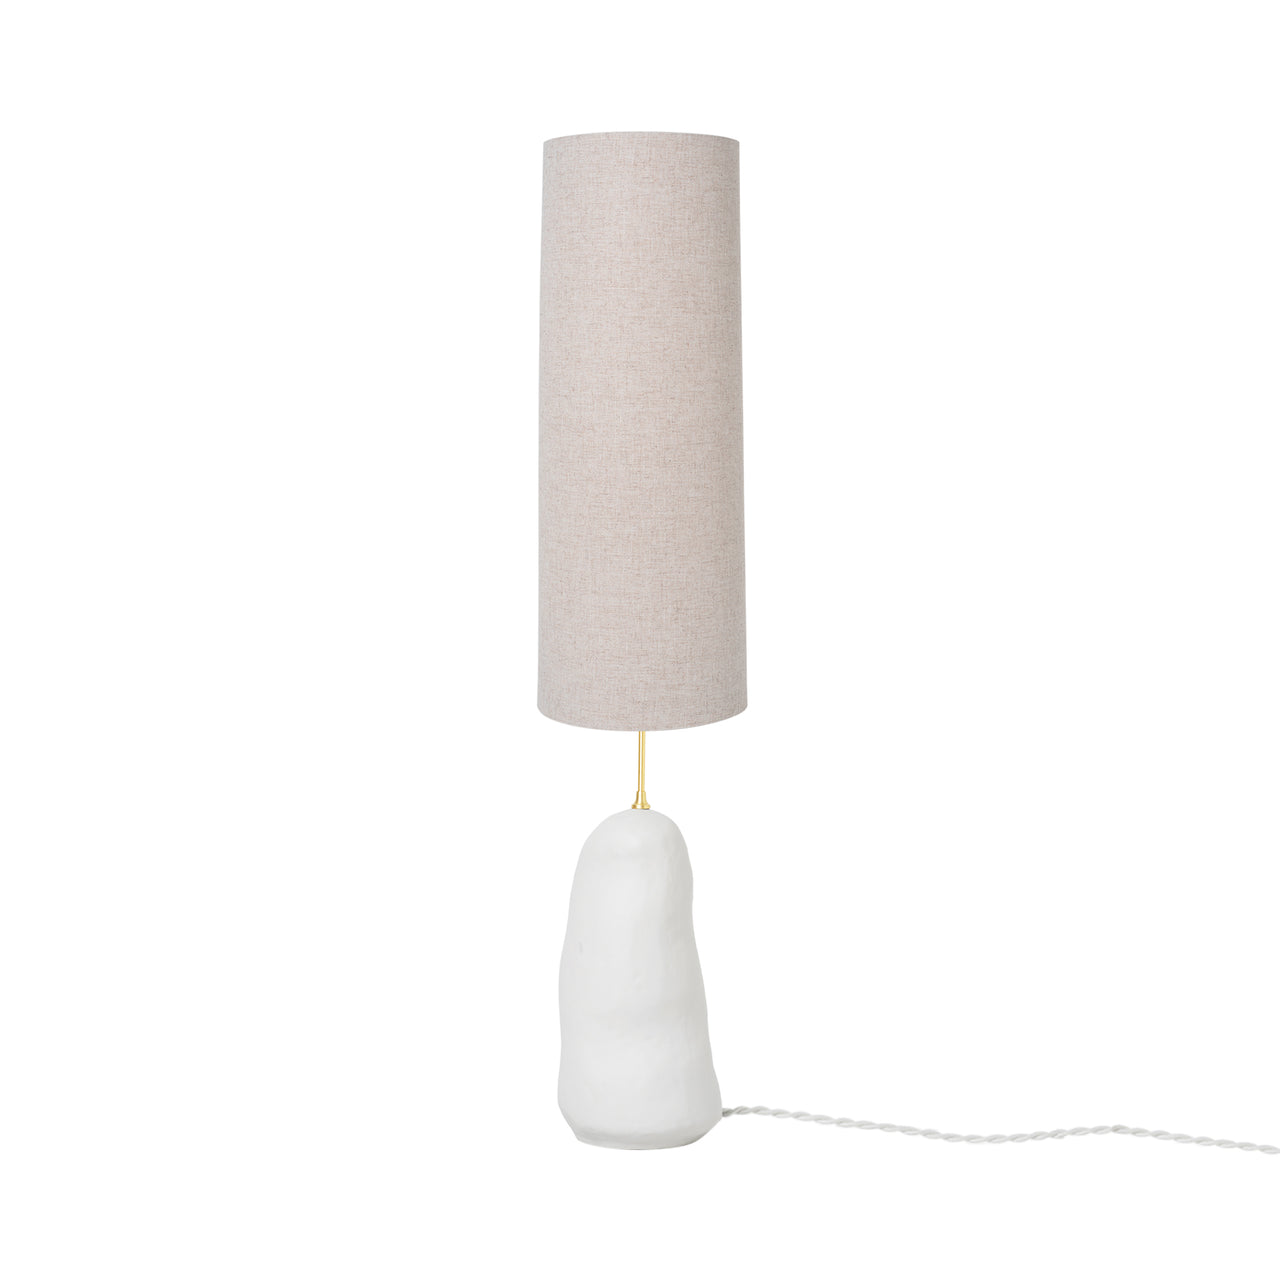 Hebe Lamp: Long + Natural + Off-White